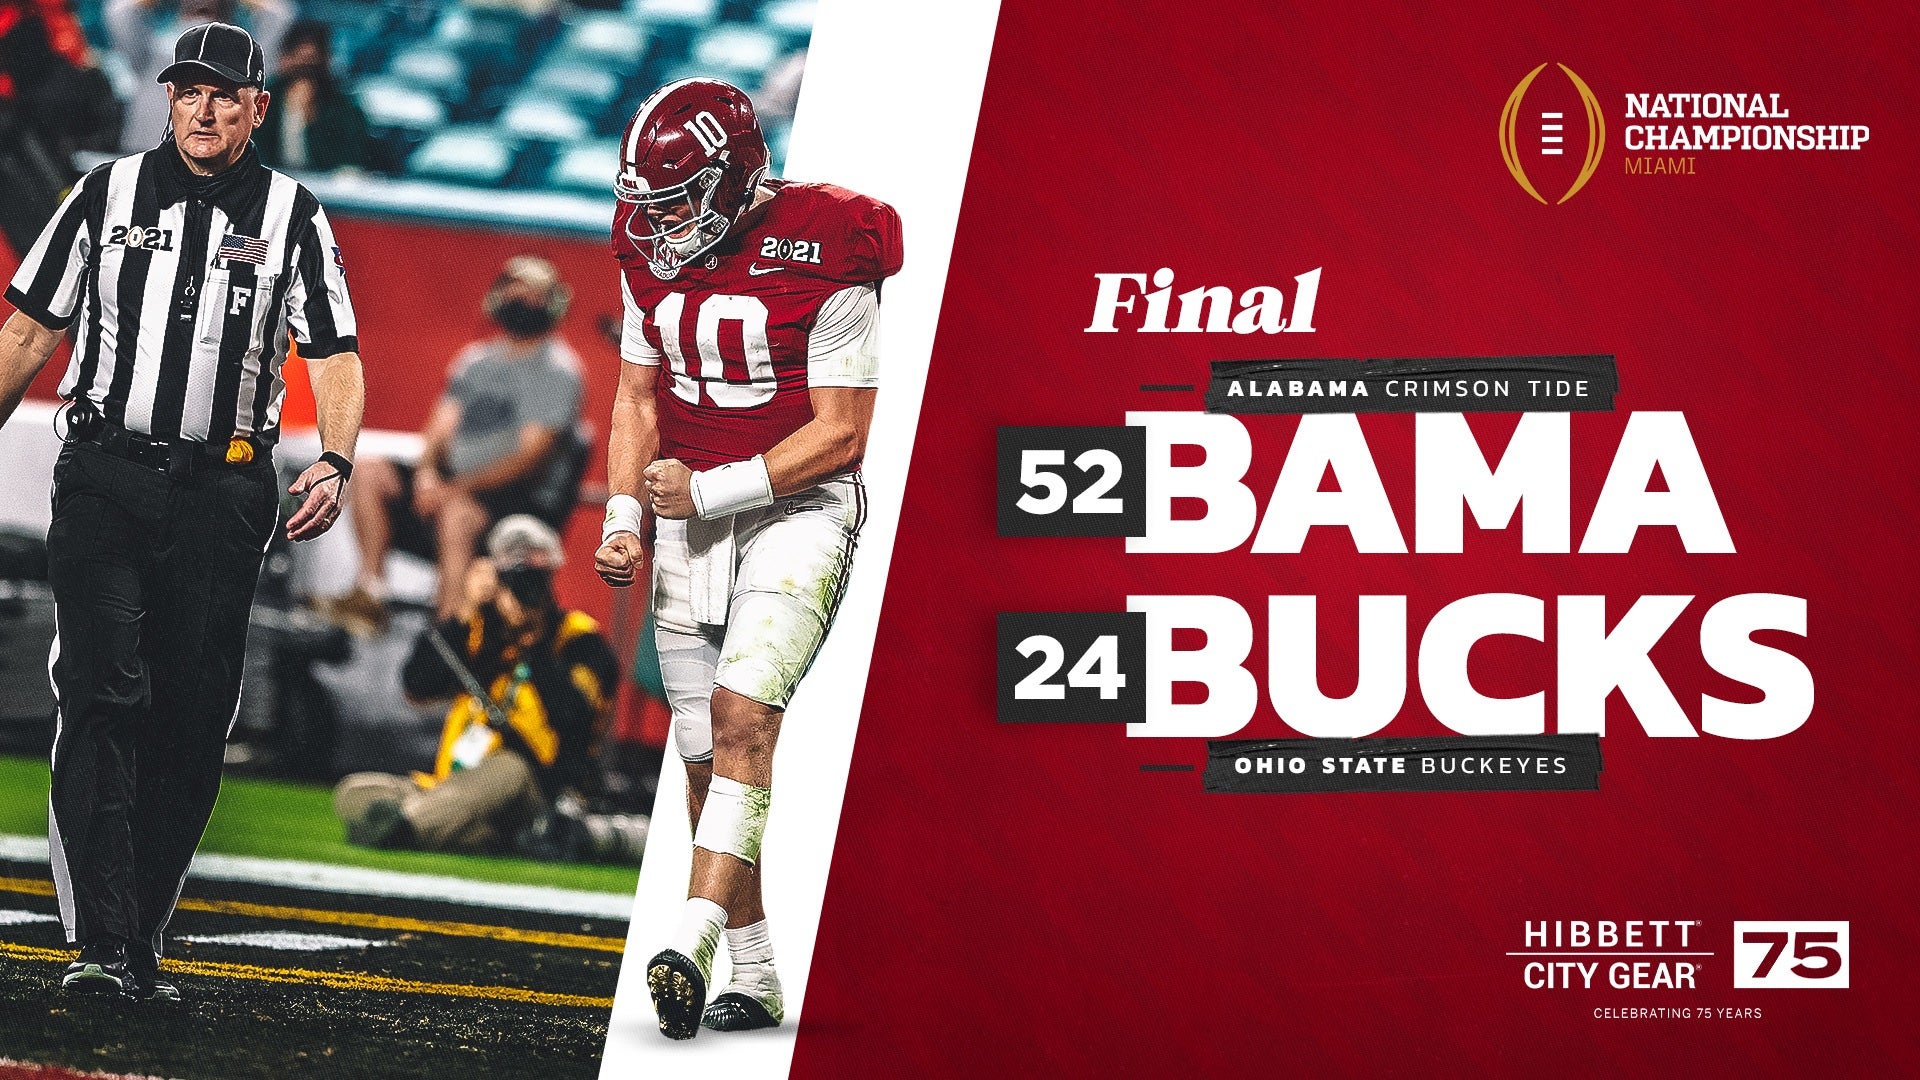 Alabama rolls over OSU to win program's 18th national title